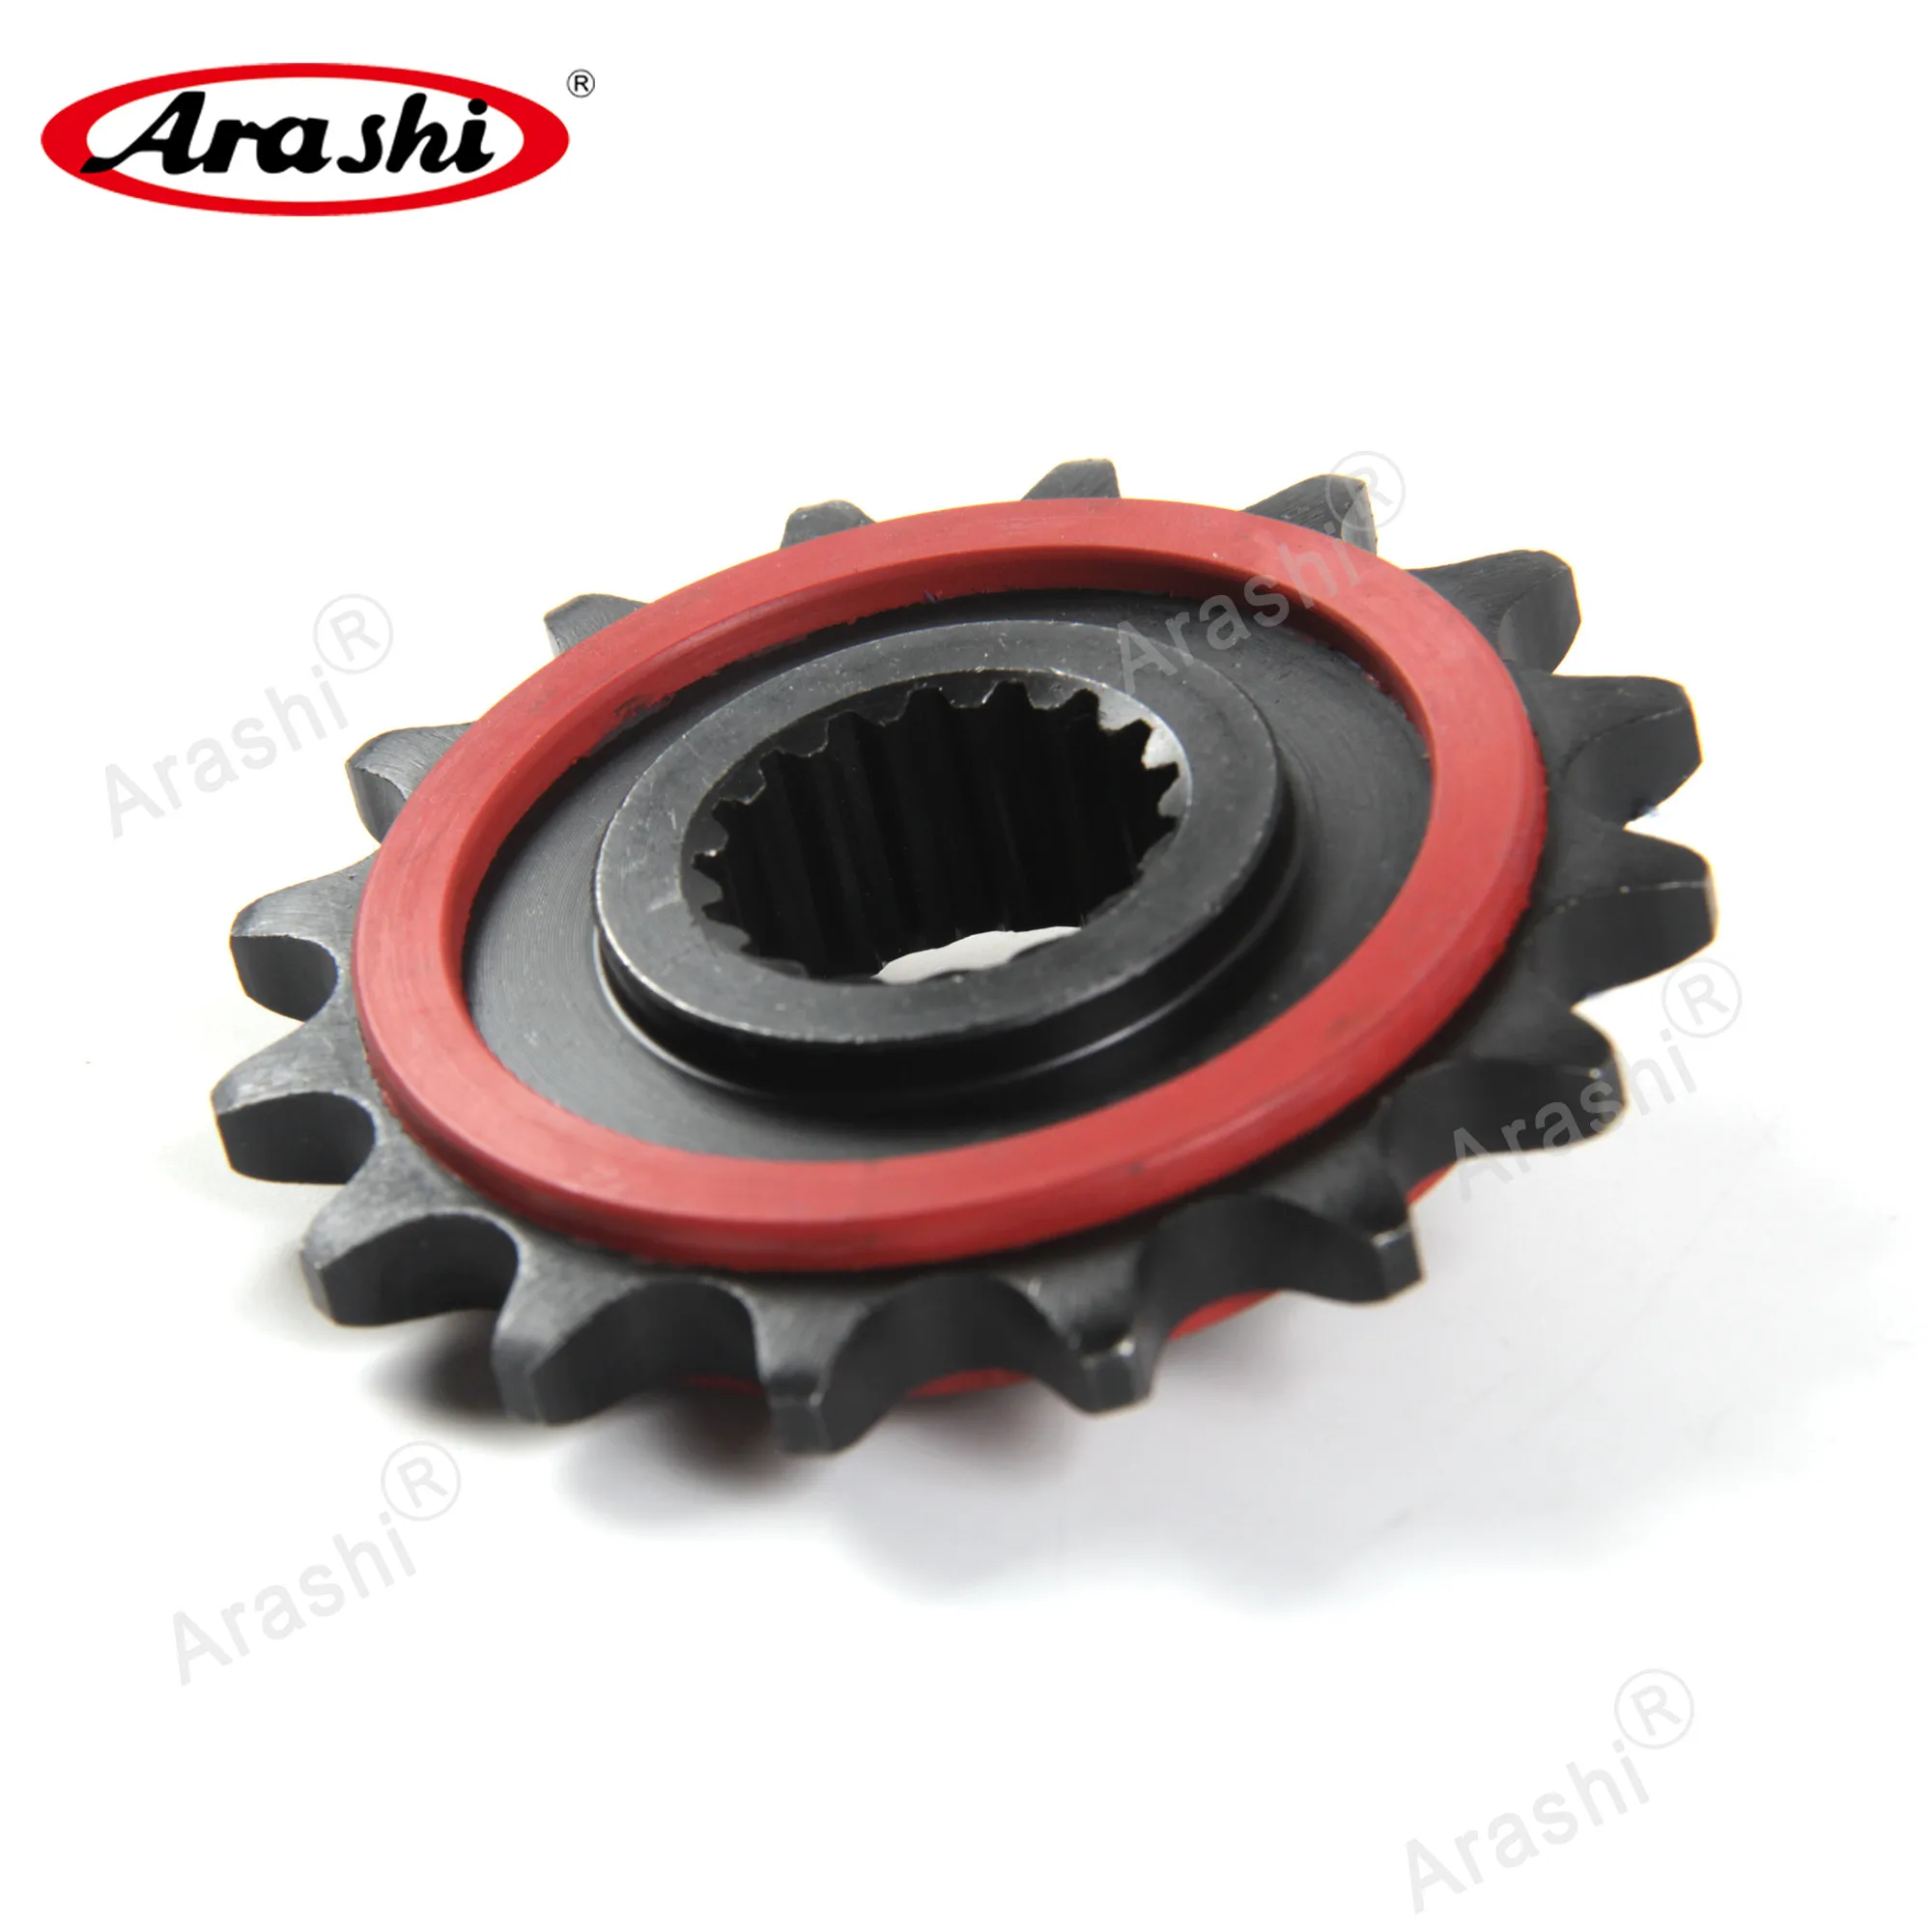 

Arashi 16T Rubber Cushioned Gear Chain Front Sprocket For BMW F800 GS Adventure K72 / F800GS 2013 2014 2015 2016 2017 2018